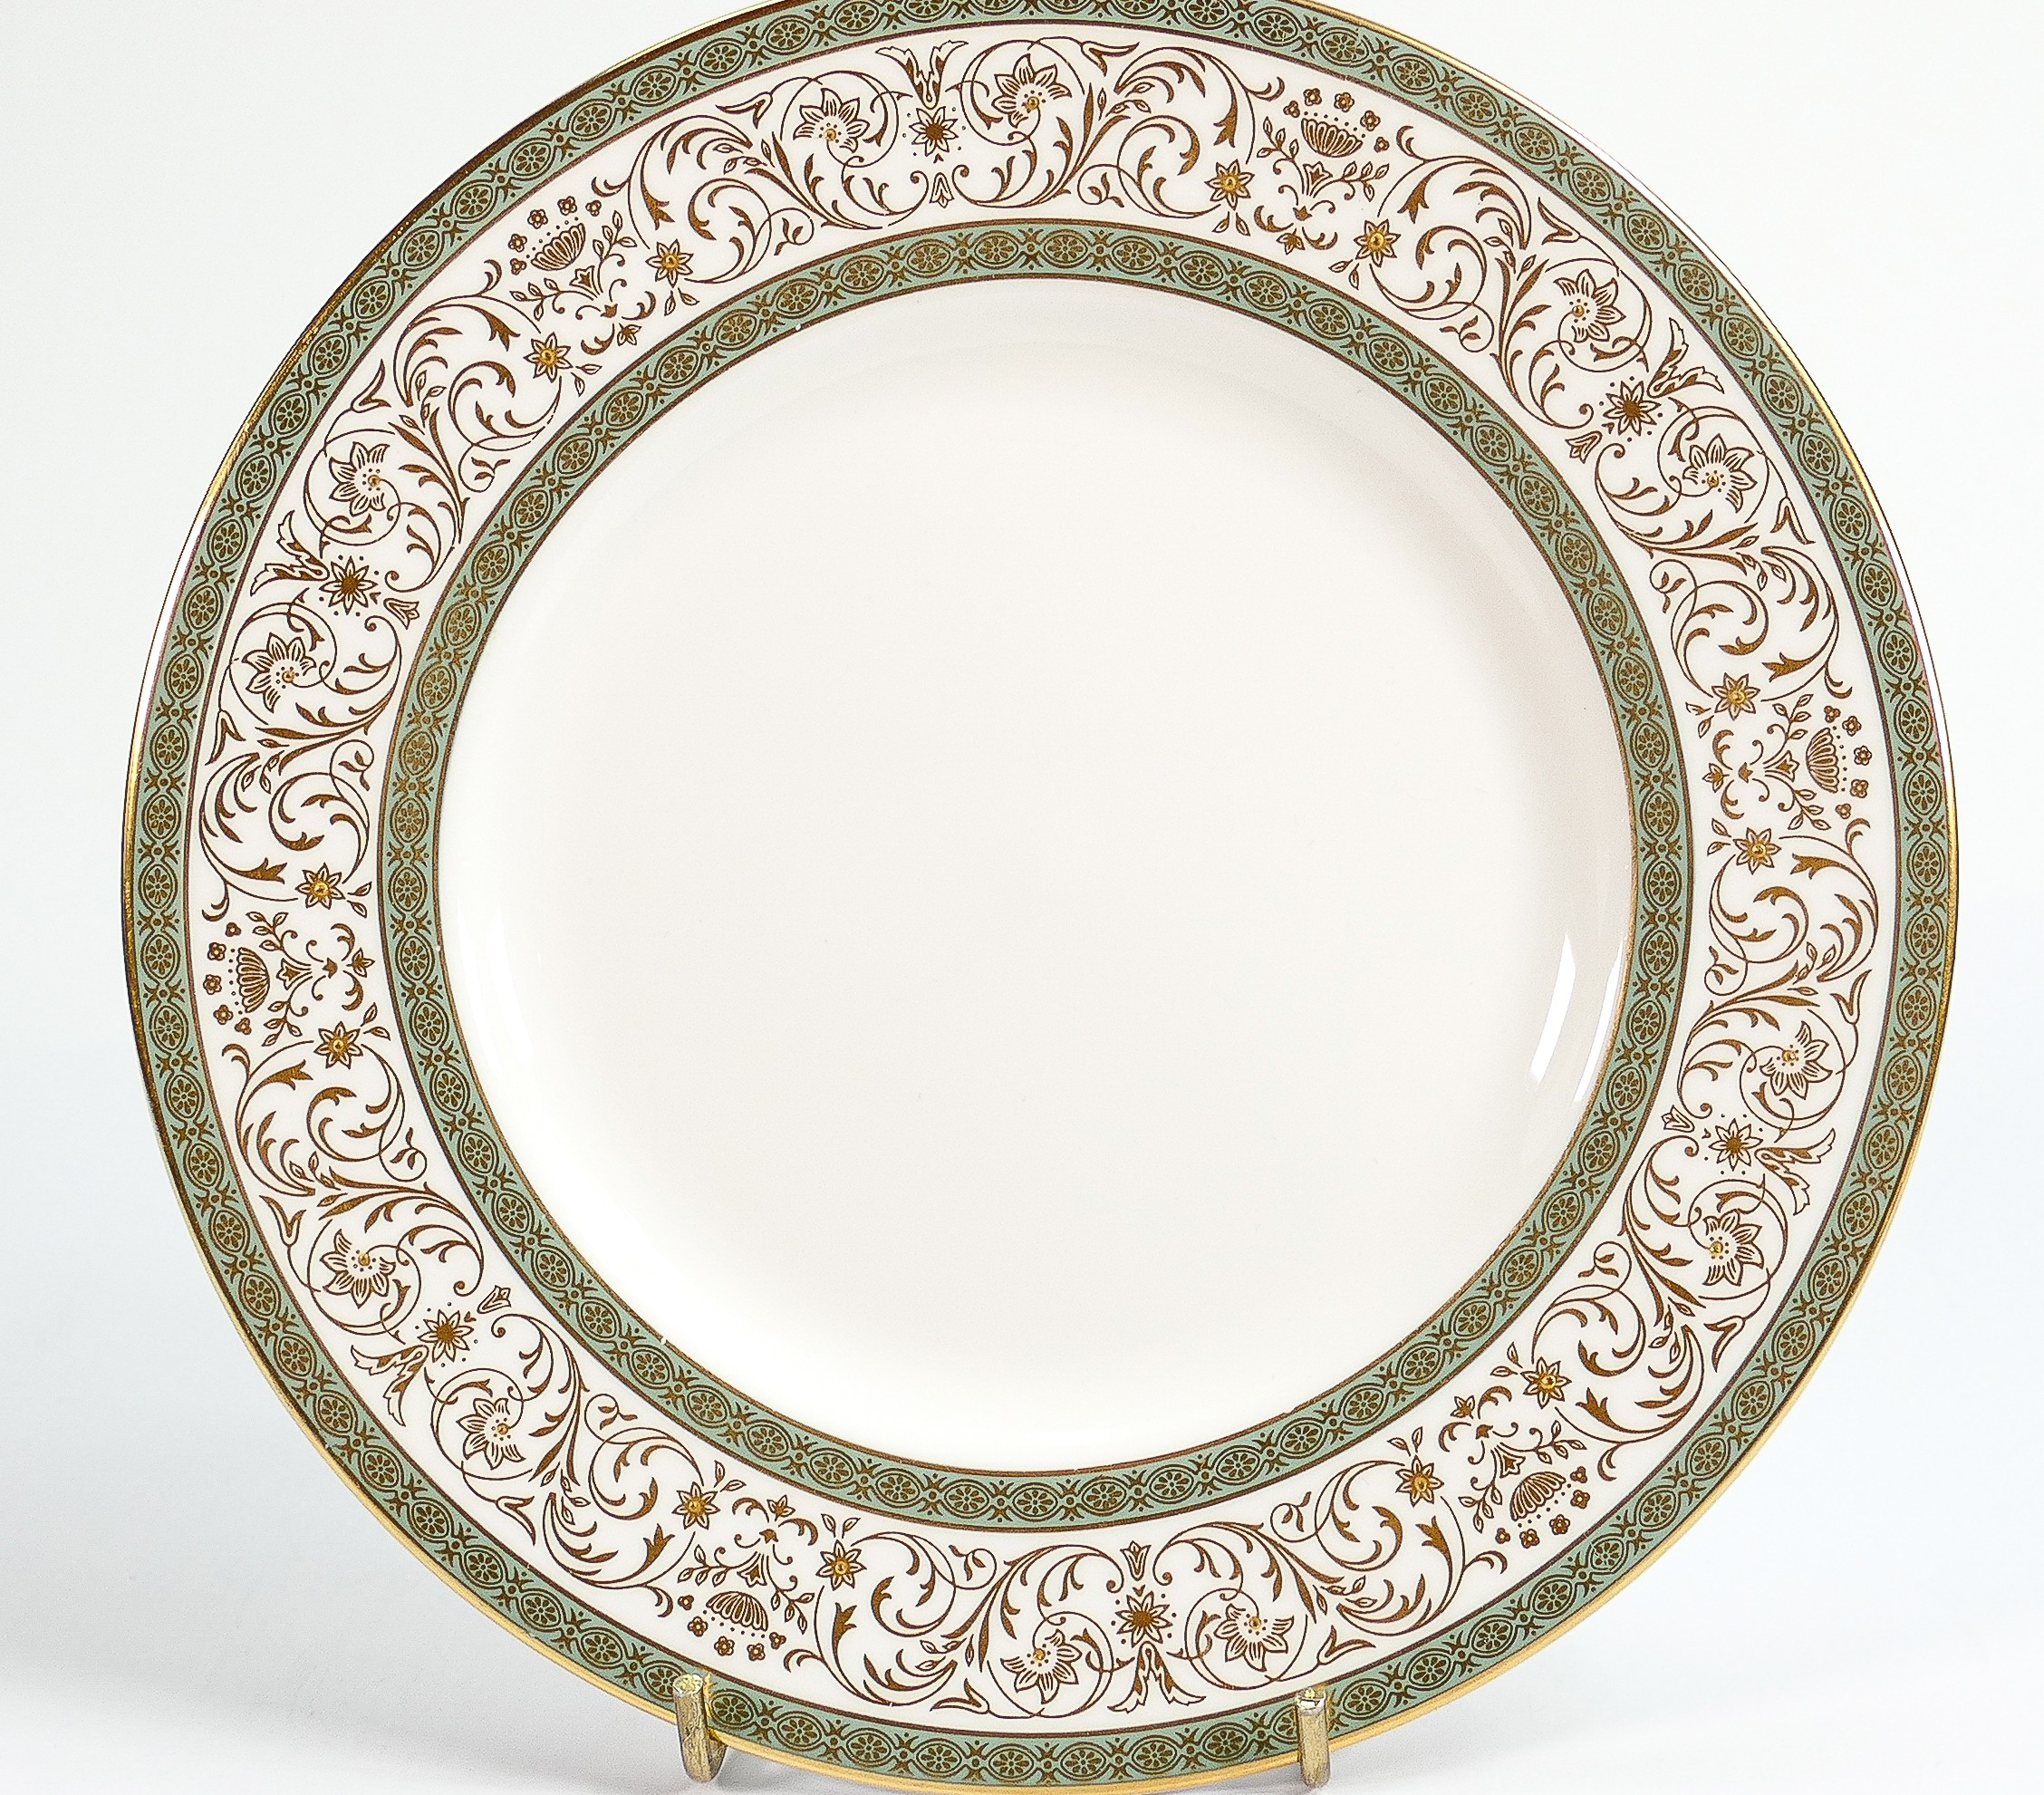 Minton gilded dinner set in the Aragon design: Including tureens, various plates, bowls and